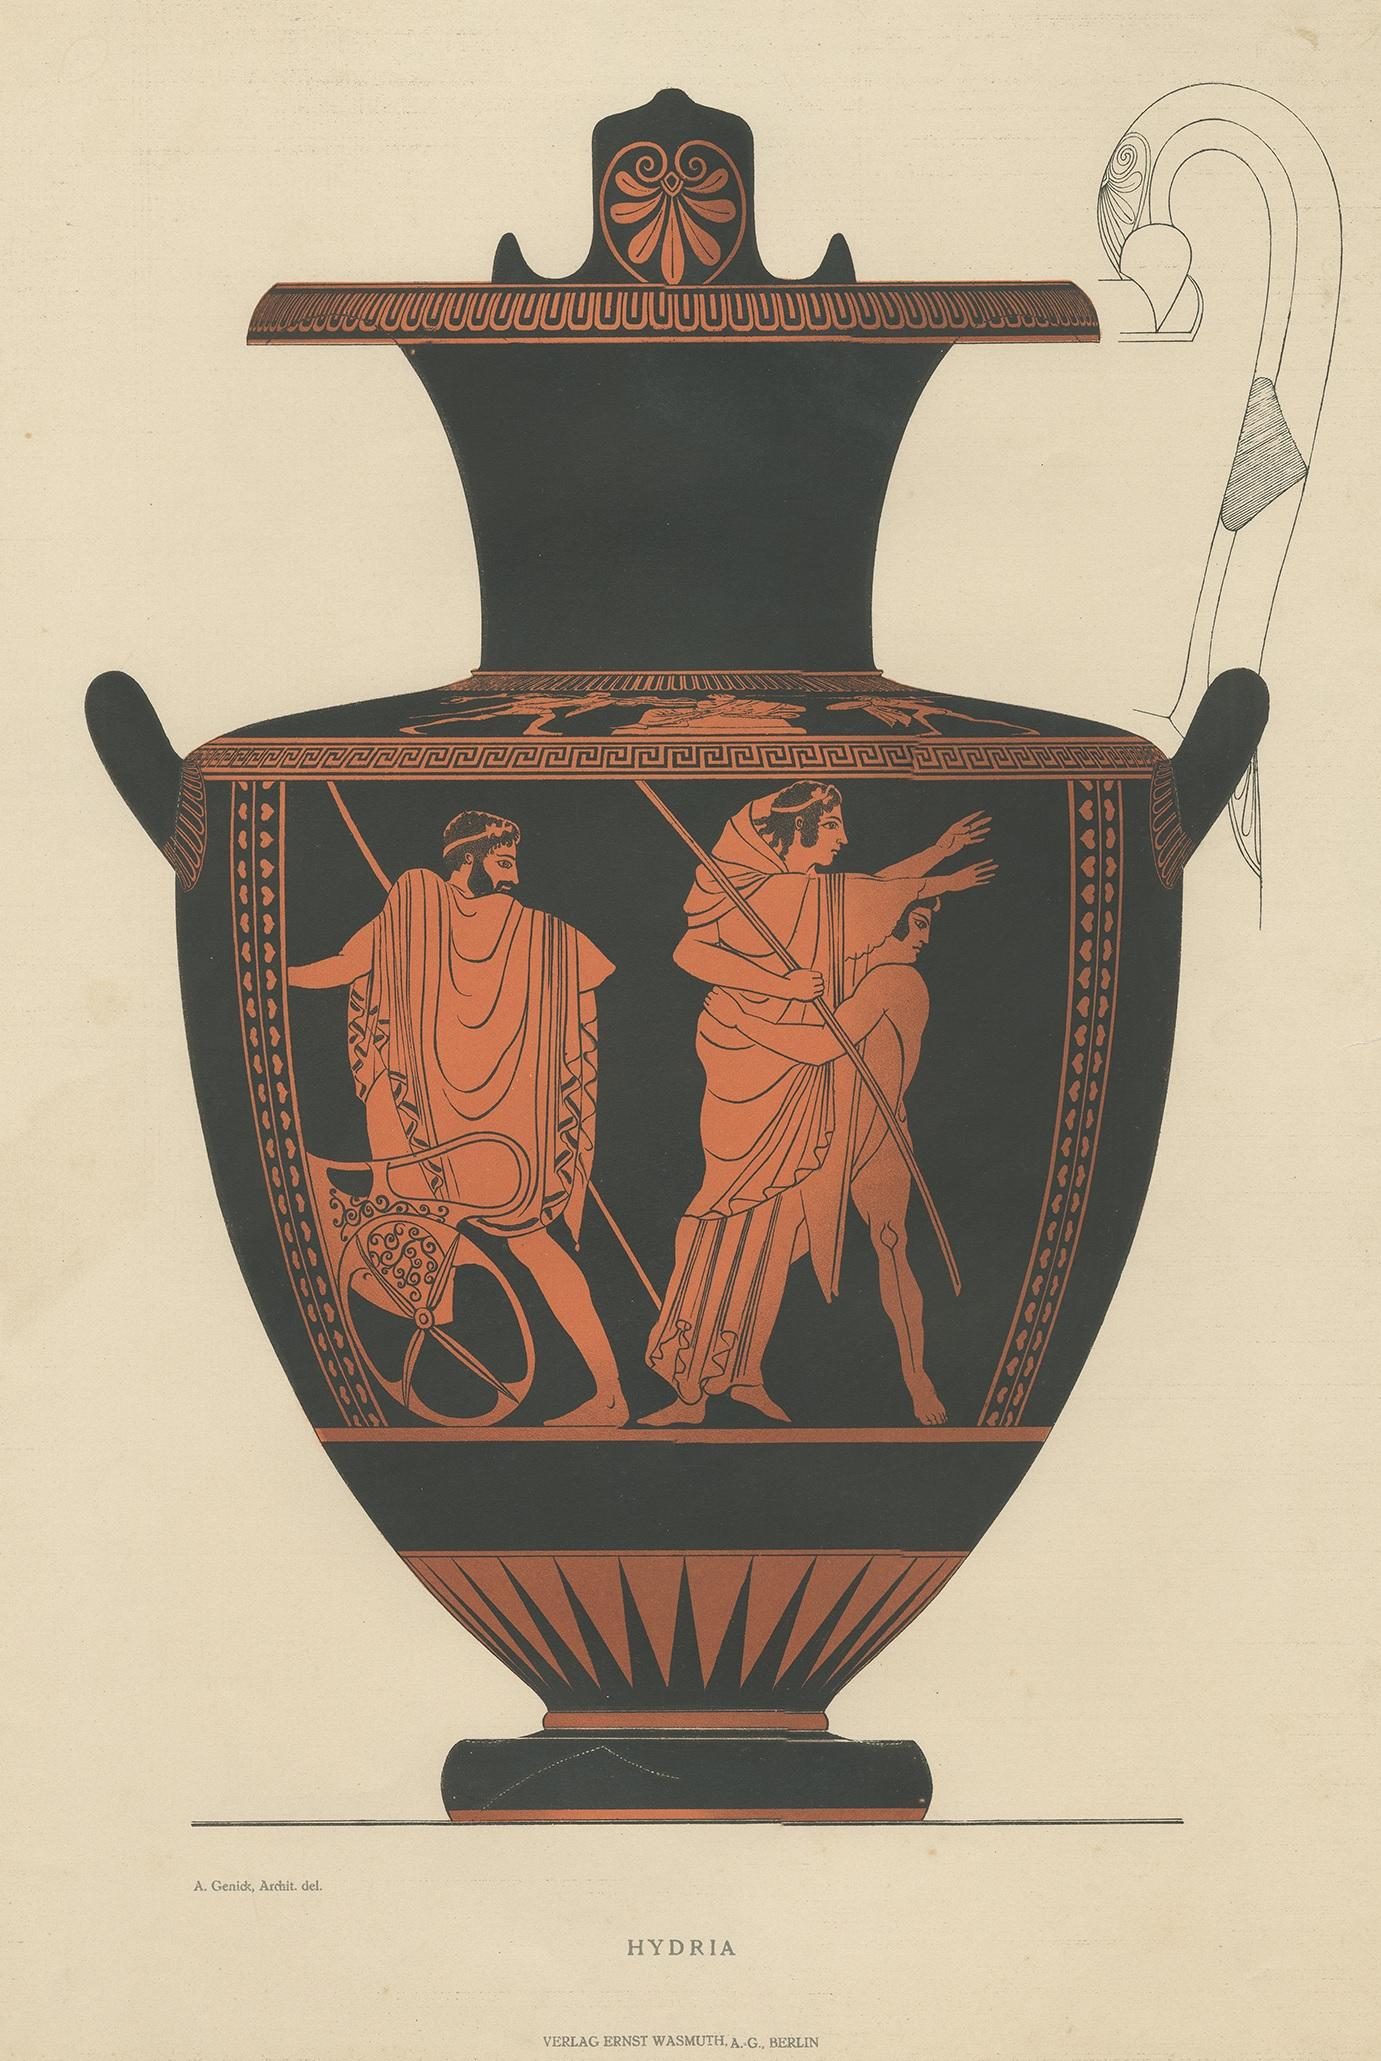 Antique print titled 'Hydria'. Colour-printed large lithograph by Ernst Wasmuth depicting a Greek hydria (water jar). A is a type of water-carrying vessel in the metalwork and pottery of ancient Greece. The hydria has three handles. Two horizontal